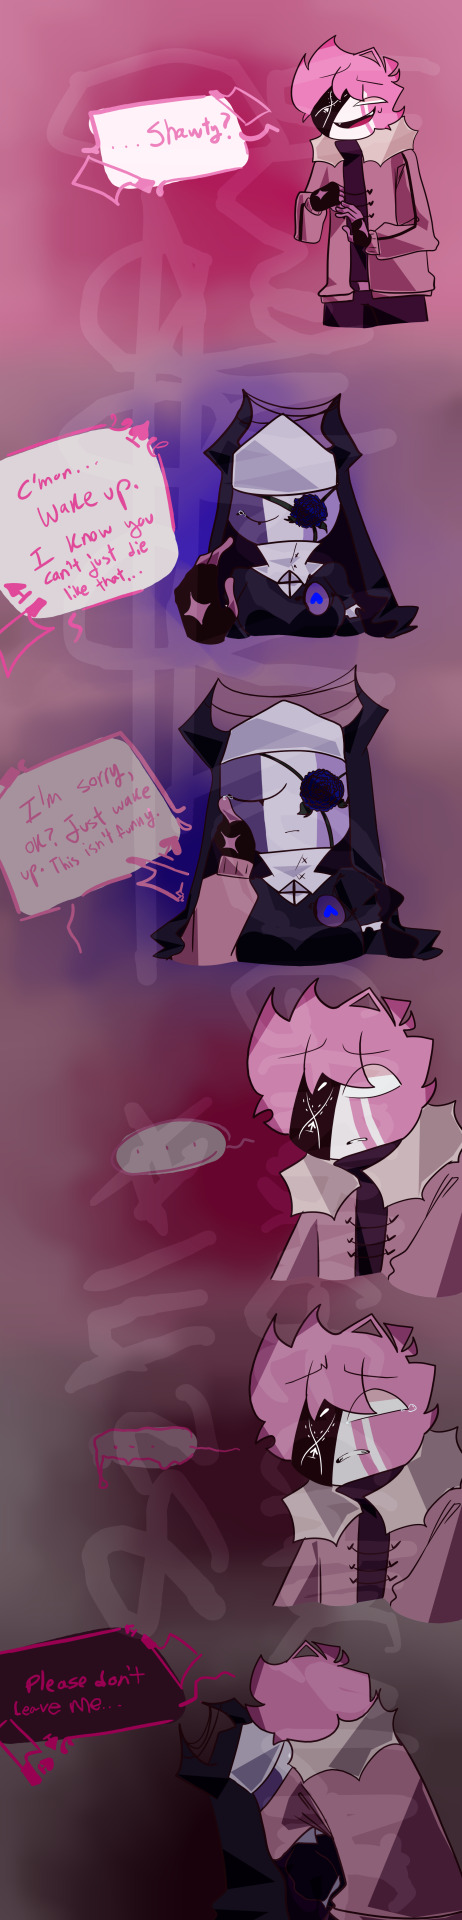 Ended up redrawing a old comic because discord said yes  #mid fight masses  #friday night funkin #fnf#fnf sarvente#sarvente#ruv#ruvyzvat#fnf ruvyzvat#fnf ruv#swap ruv#swap sarvente#swap#swap au#au #broken vow au #art#digital art#mod chocolate#comic#fancomic#angst #sad boi hours